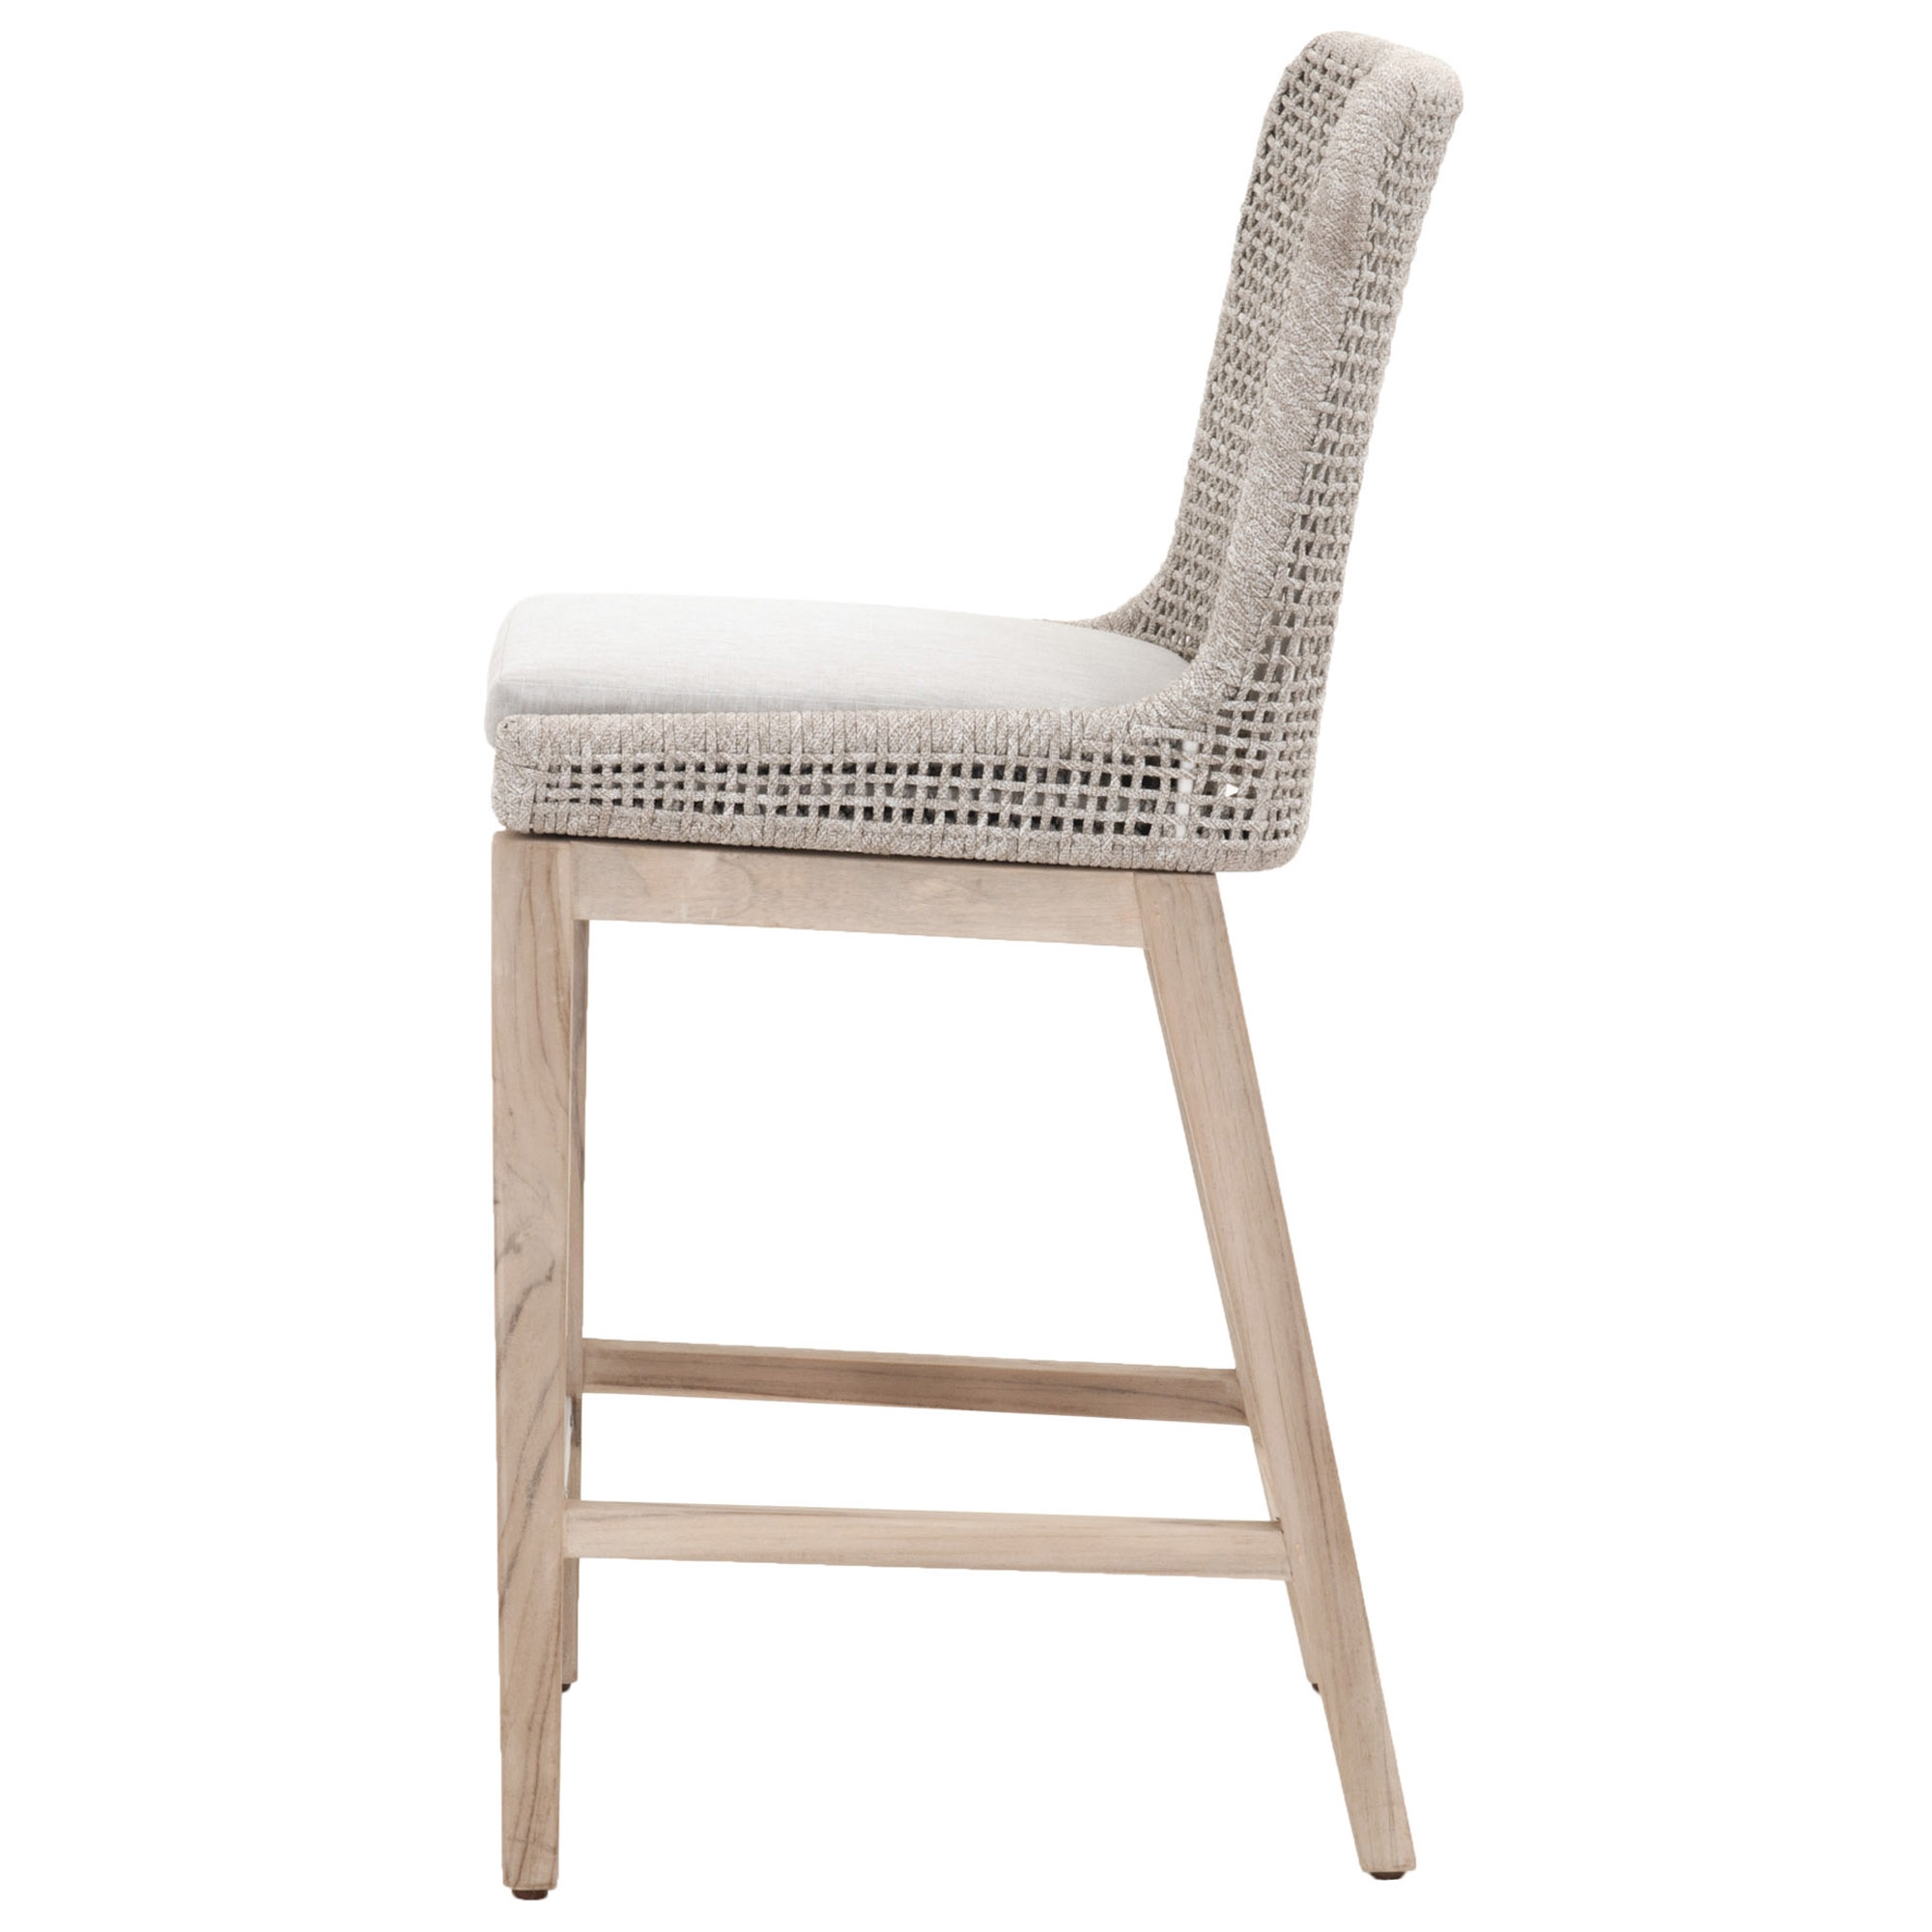 Mesh Outdoor Counter Stool - Image 2